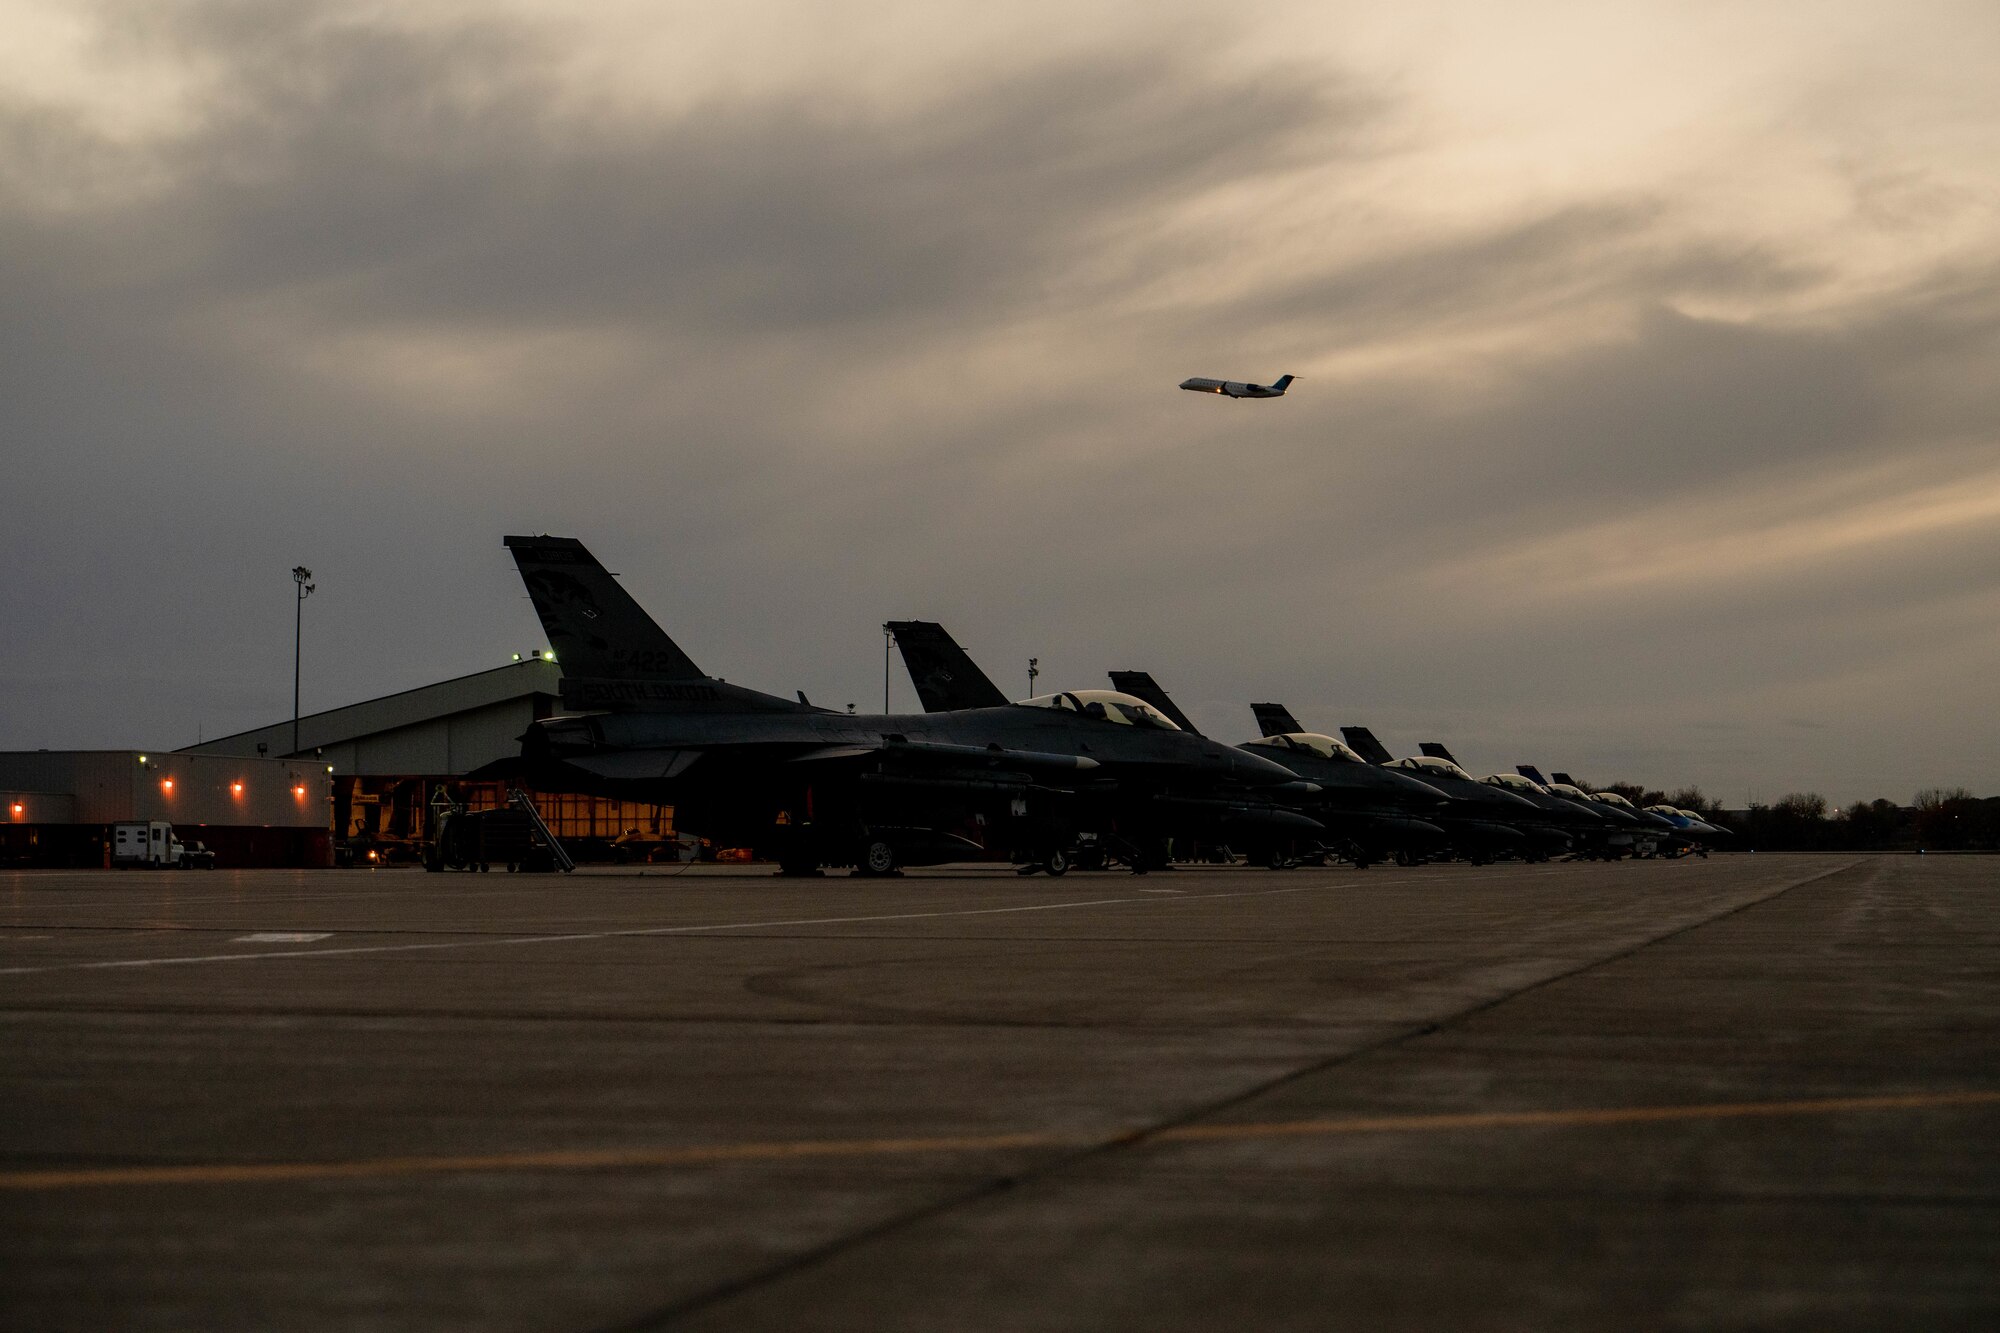 114th Fighter Wing F-16s fighting falcons are parked on the flight line prior to the night flying operations at Joe Foss Field, South Dakota, October 26, 2022.